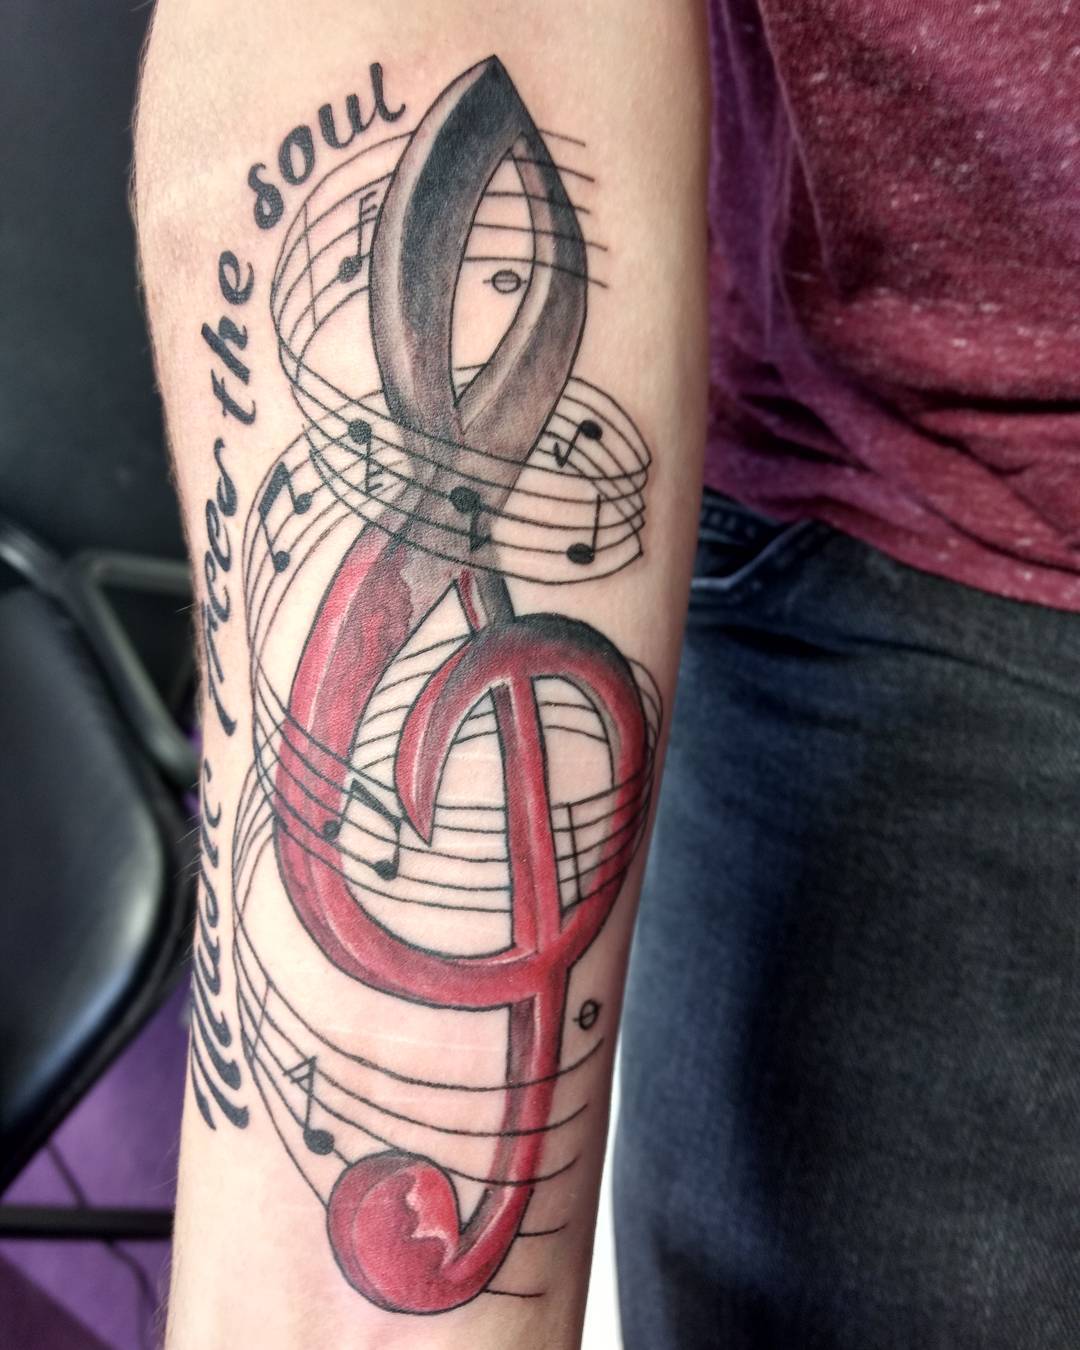 75+ Best Music Tattoo Designs & Meanings - Notes & Instruments (2019)